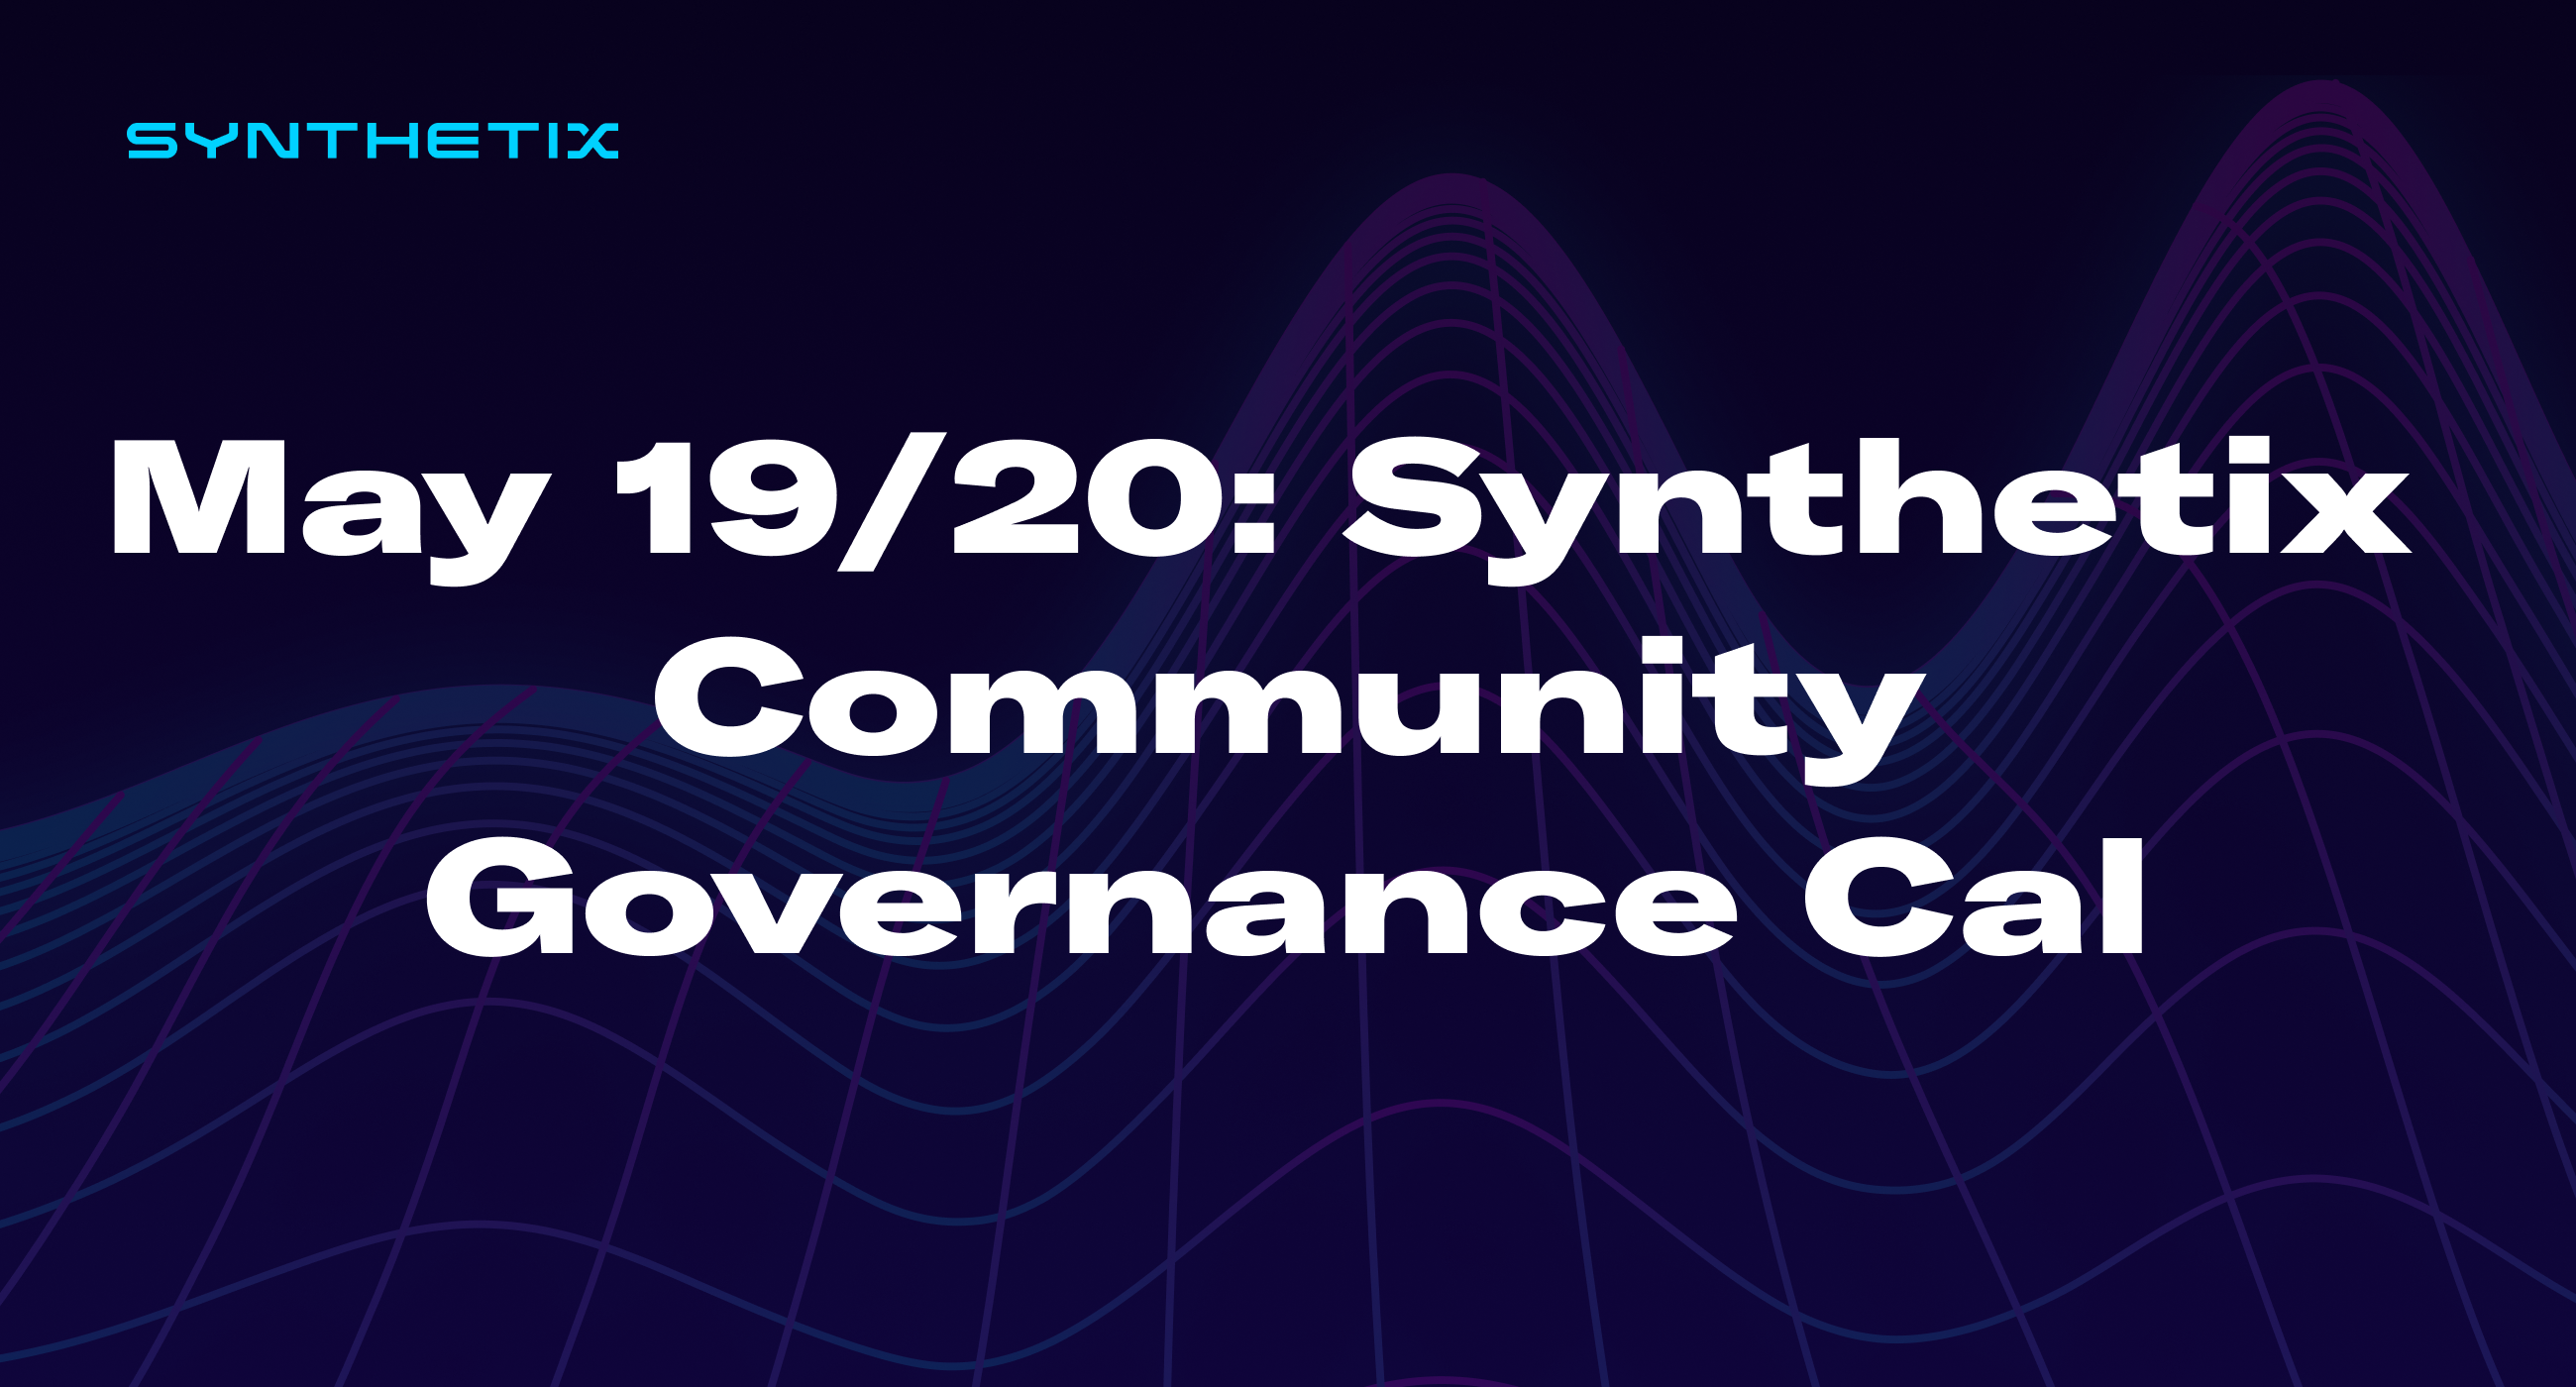 Come join us on May 19/20 for the next Synthetix community governance call!